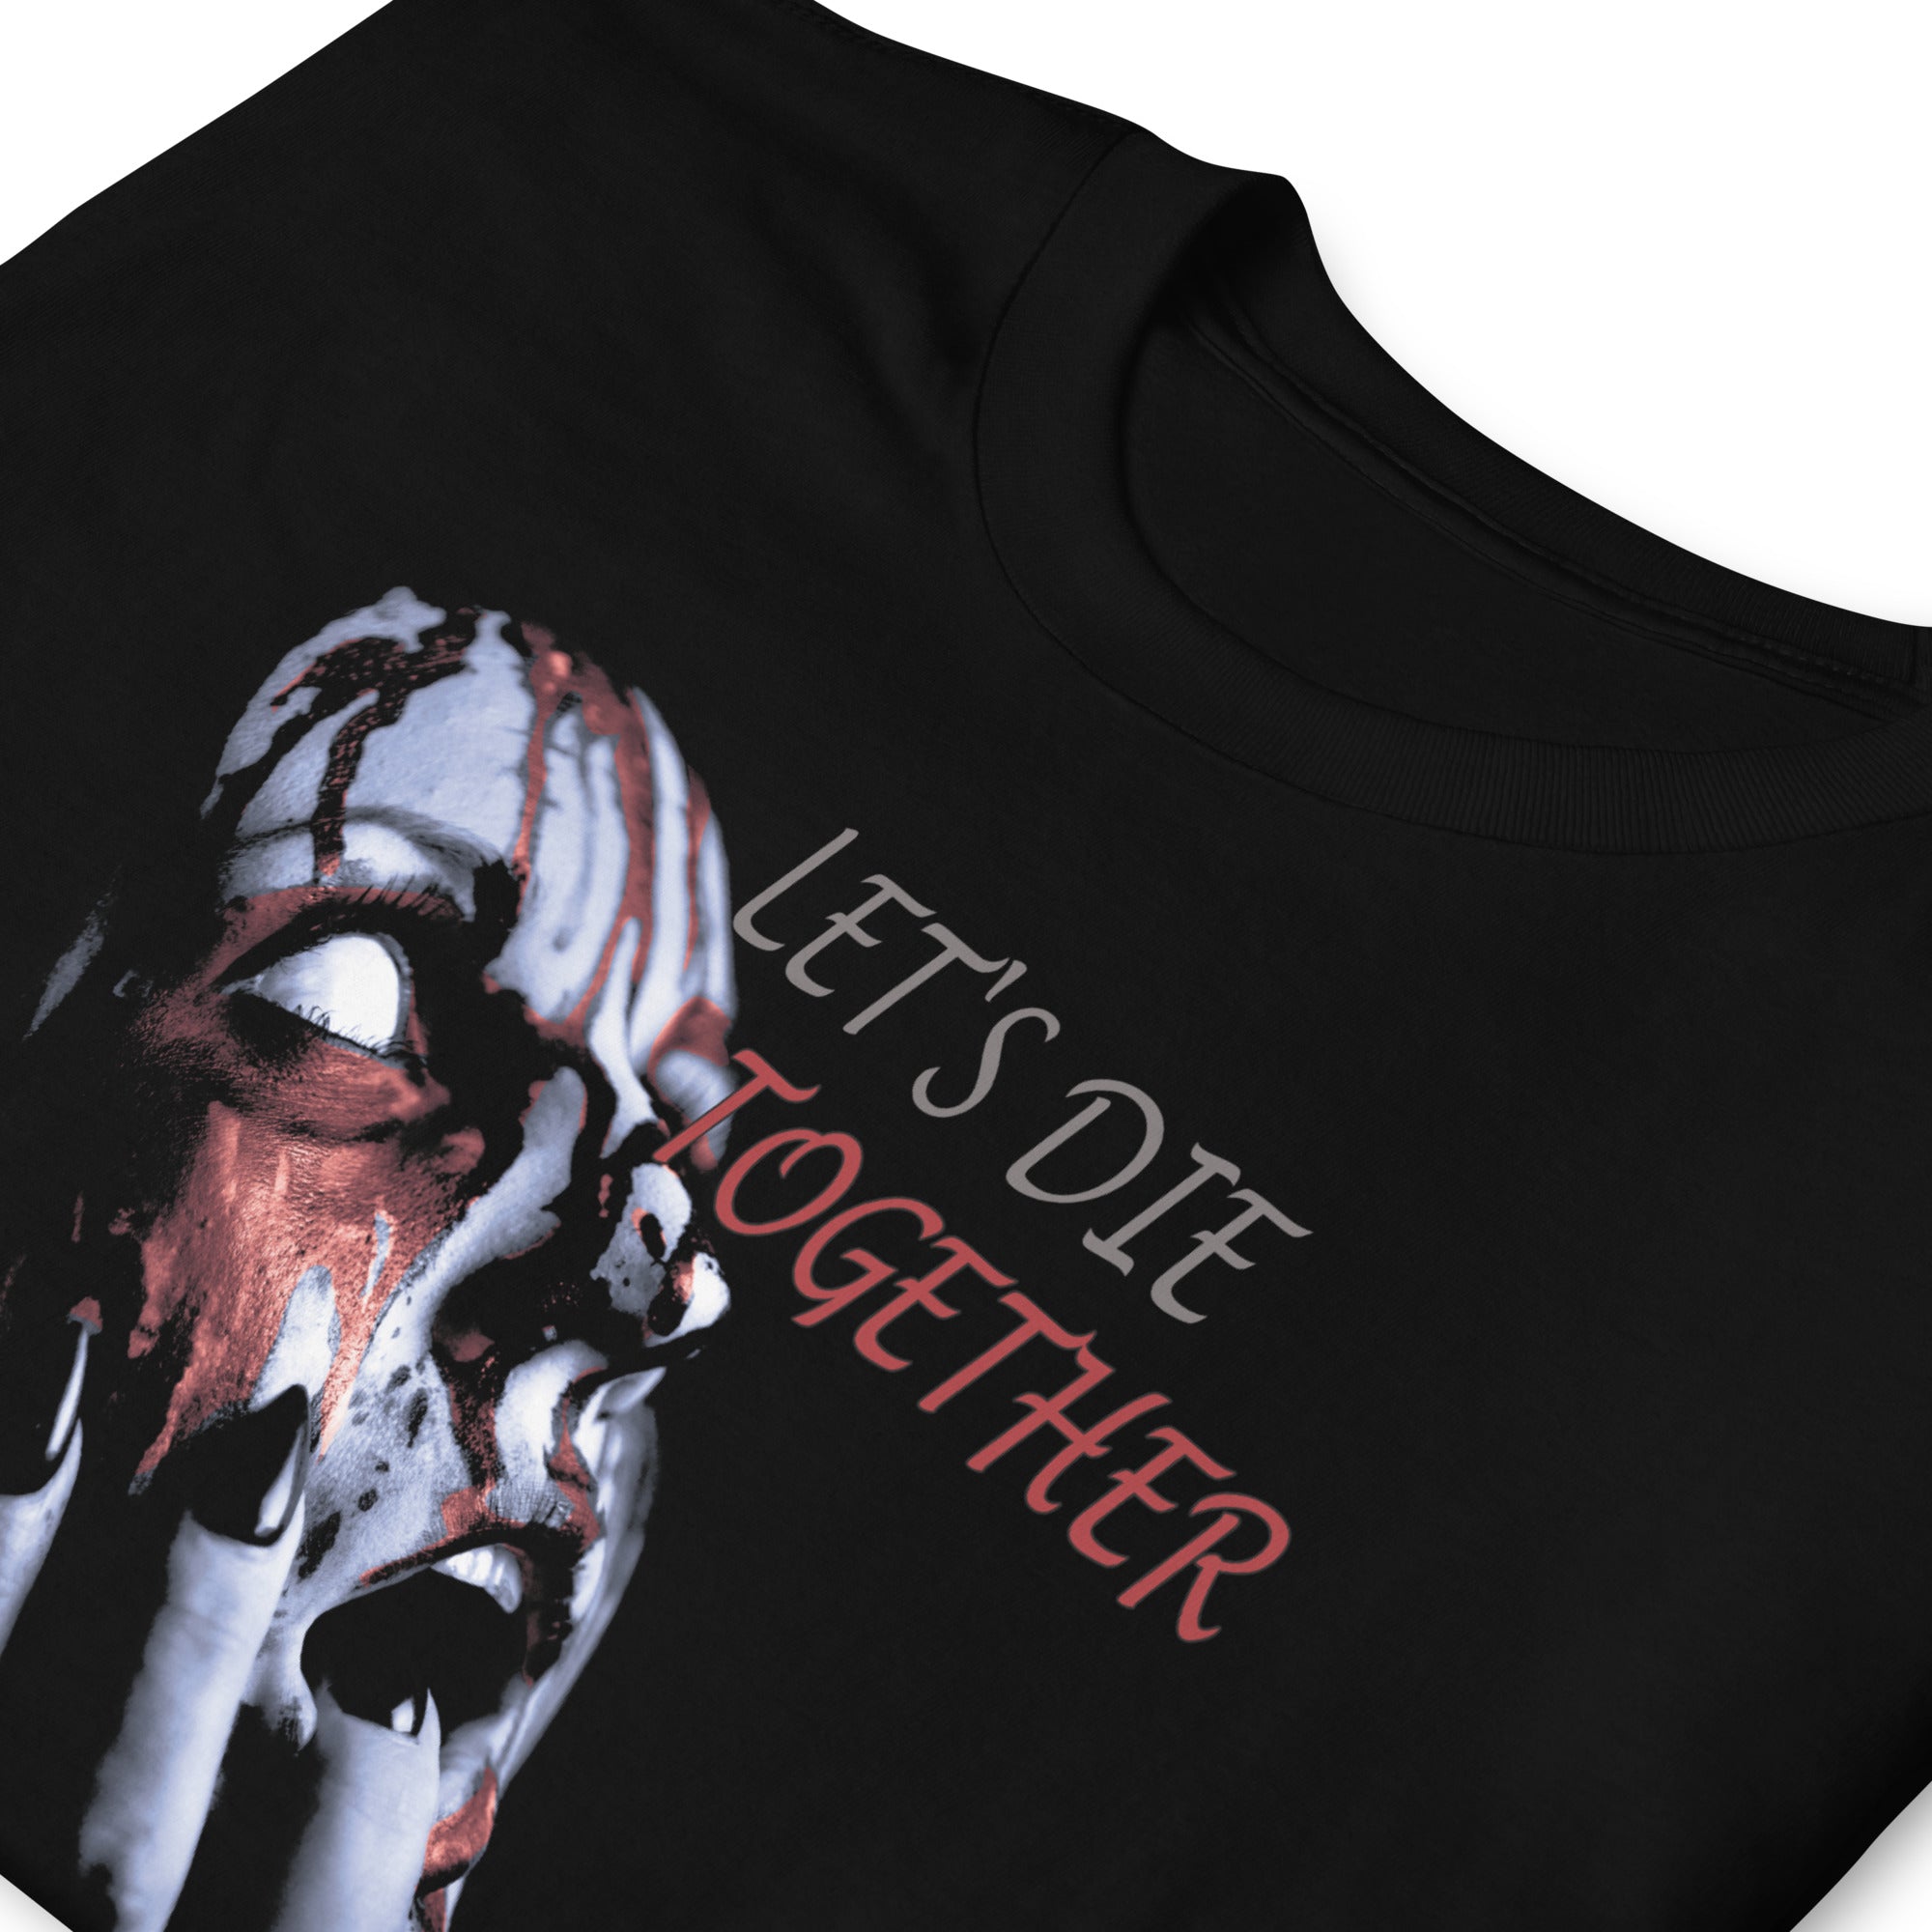 Together Forever Horror Gothic Fashion Short-Sleeve T-Shirt